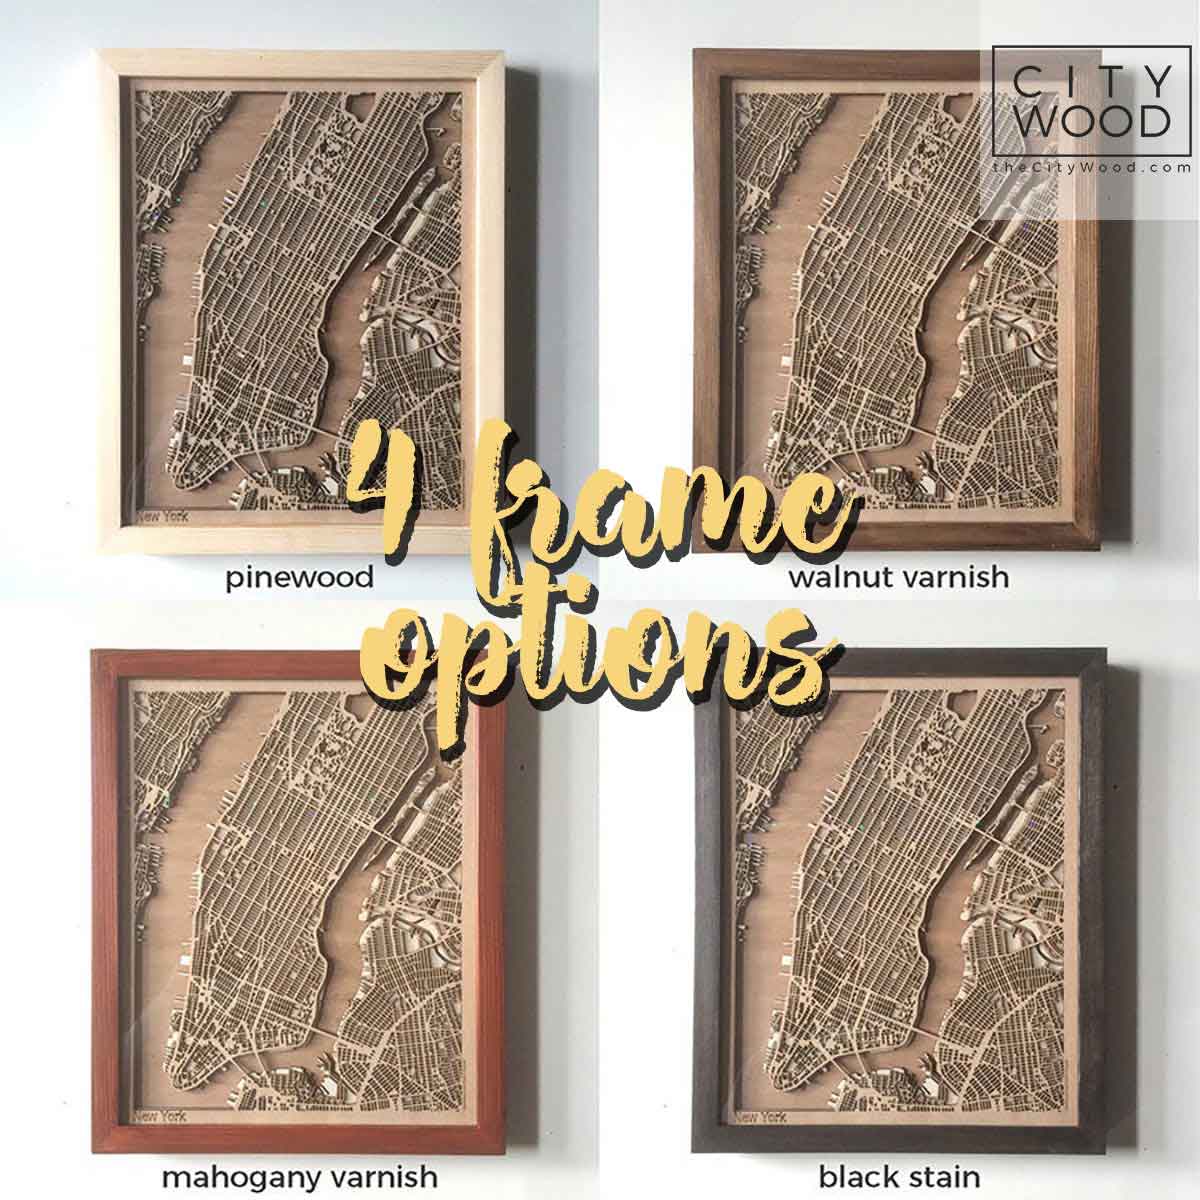 University Campus Wooden Map by CityWood - Custom Wood Map Art - Unique Laser Cut Engraved - Anniversary Gift